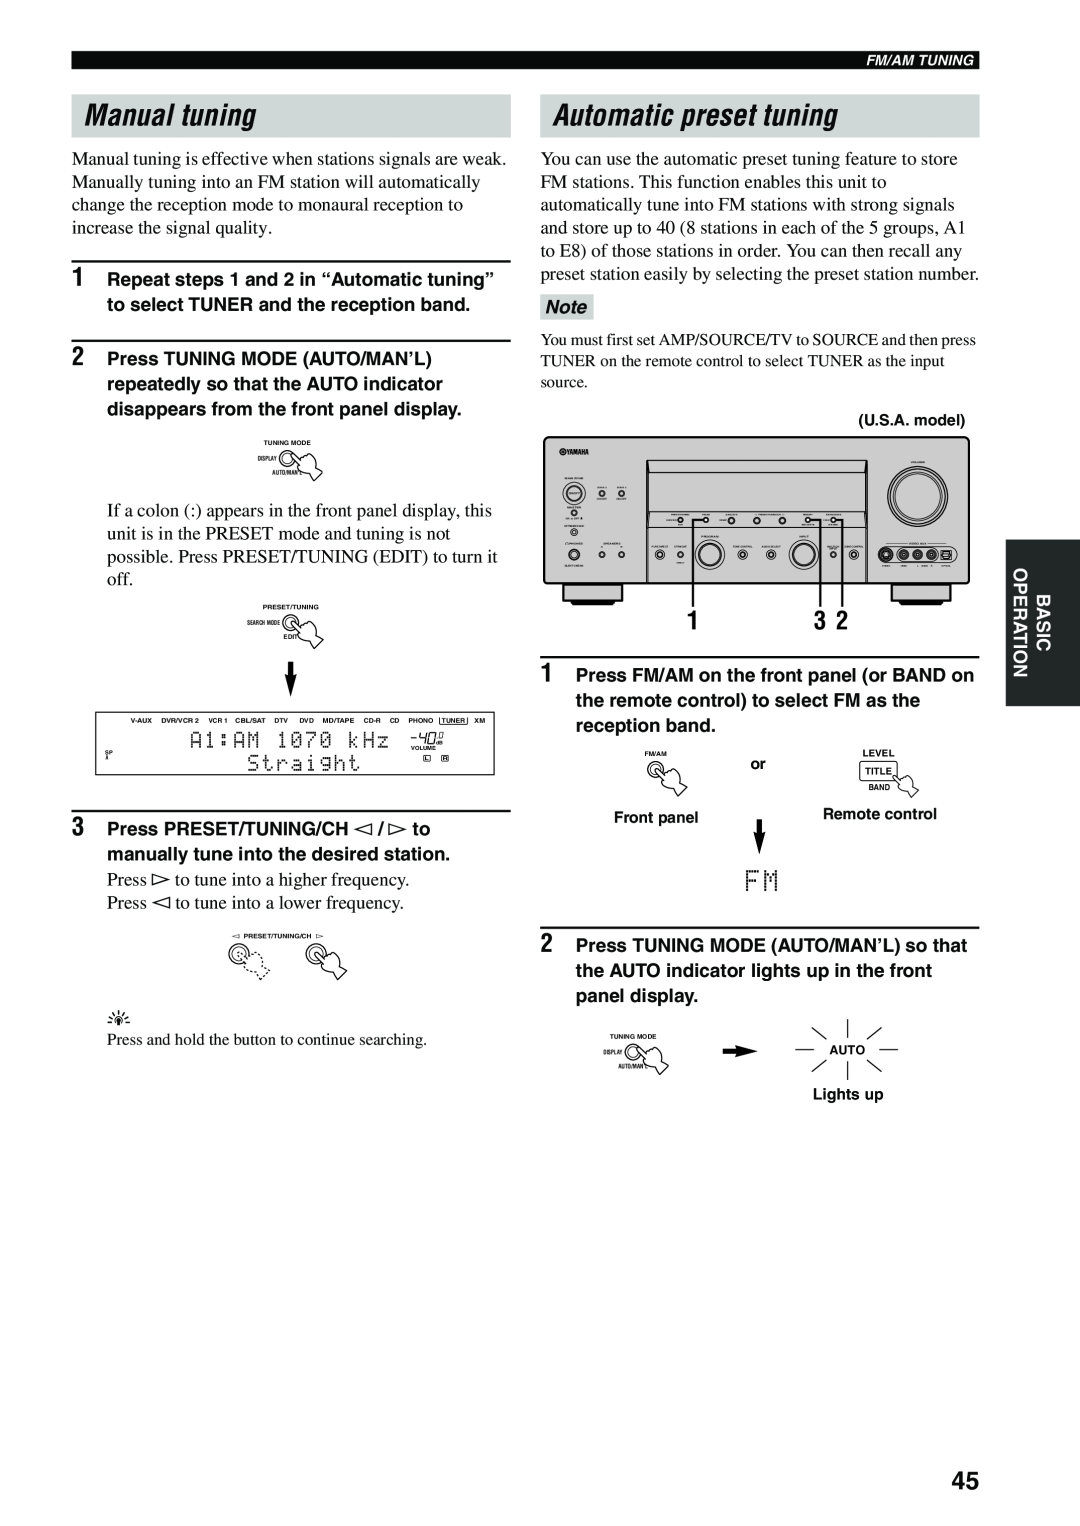 Yamaha HTR-5990 owner manual Manual tuning, Automatic preset tuning, A1:AM 1070 kHz, Straight 